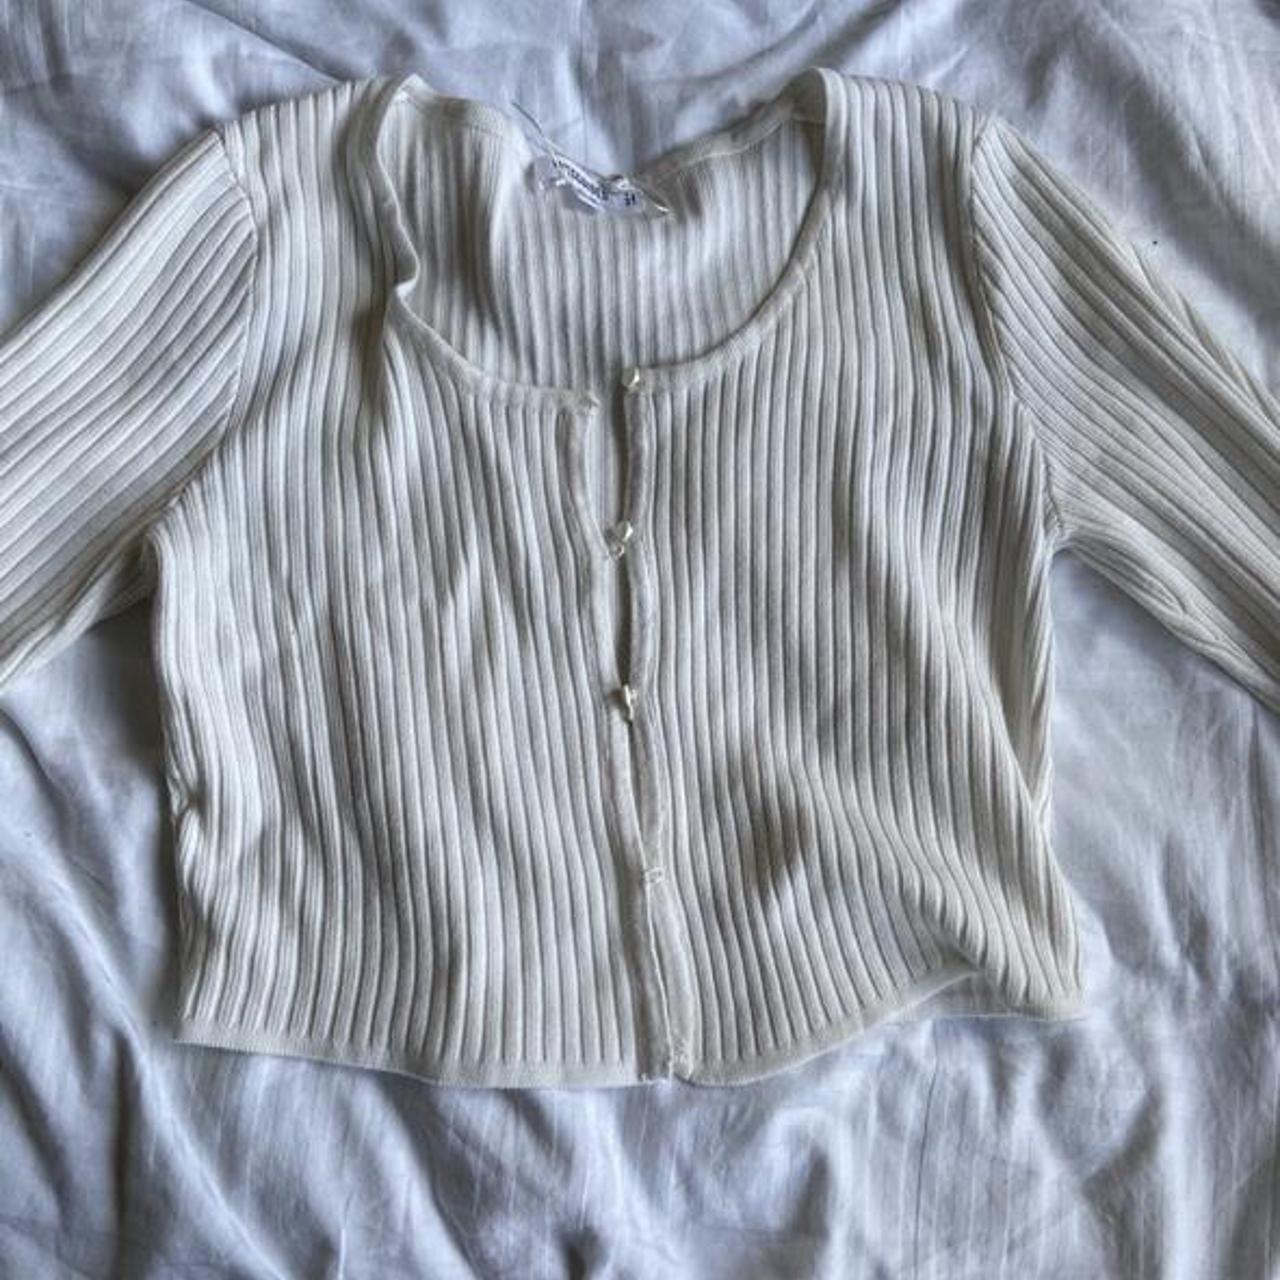 Missguided white ribbed button up cardigan top,... - Depop